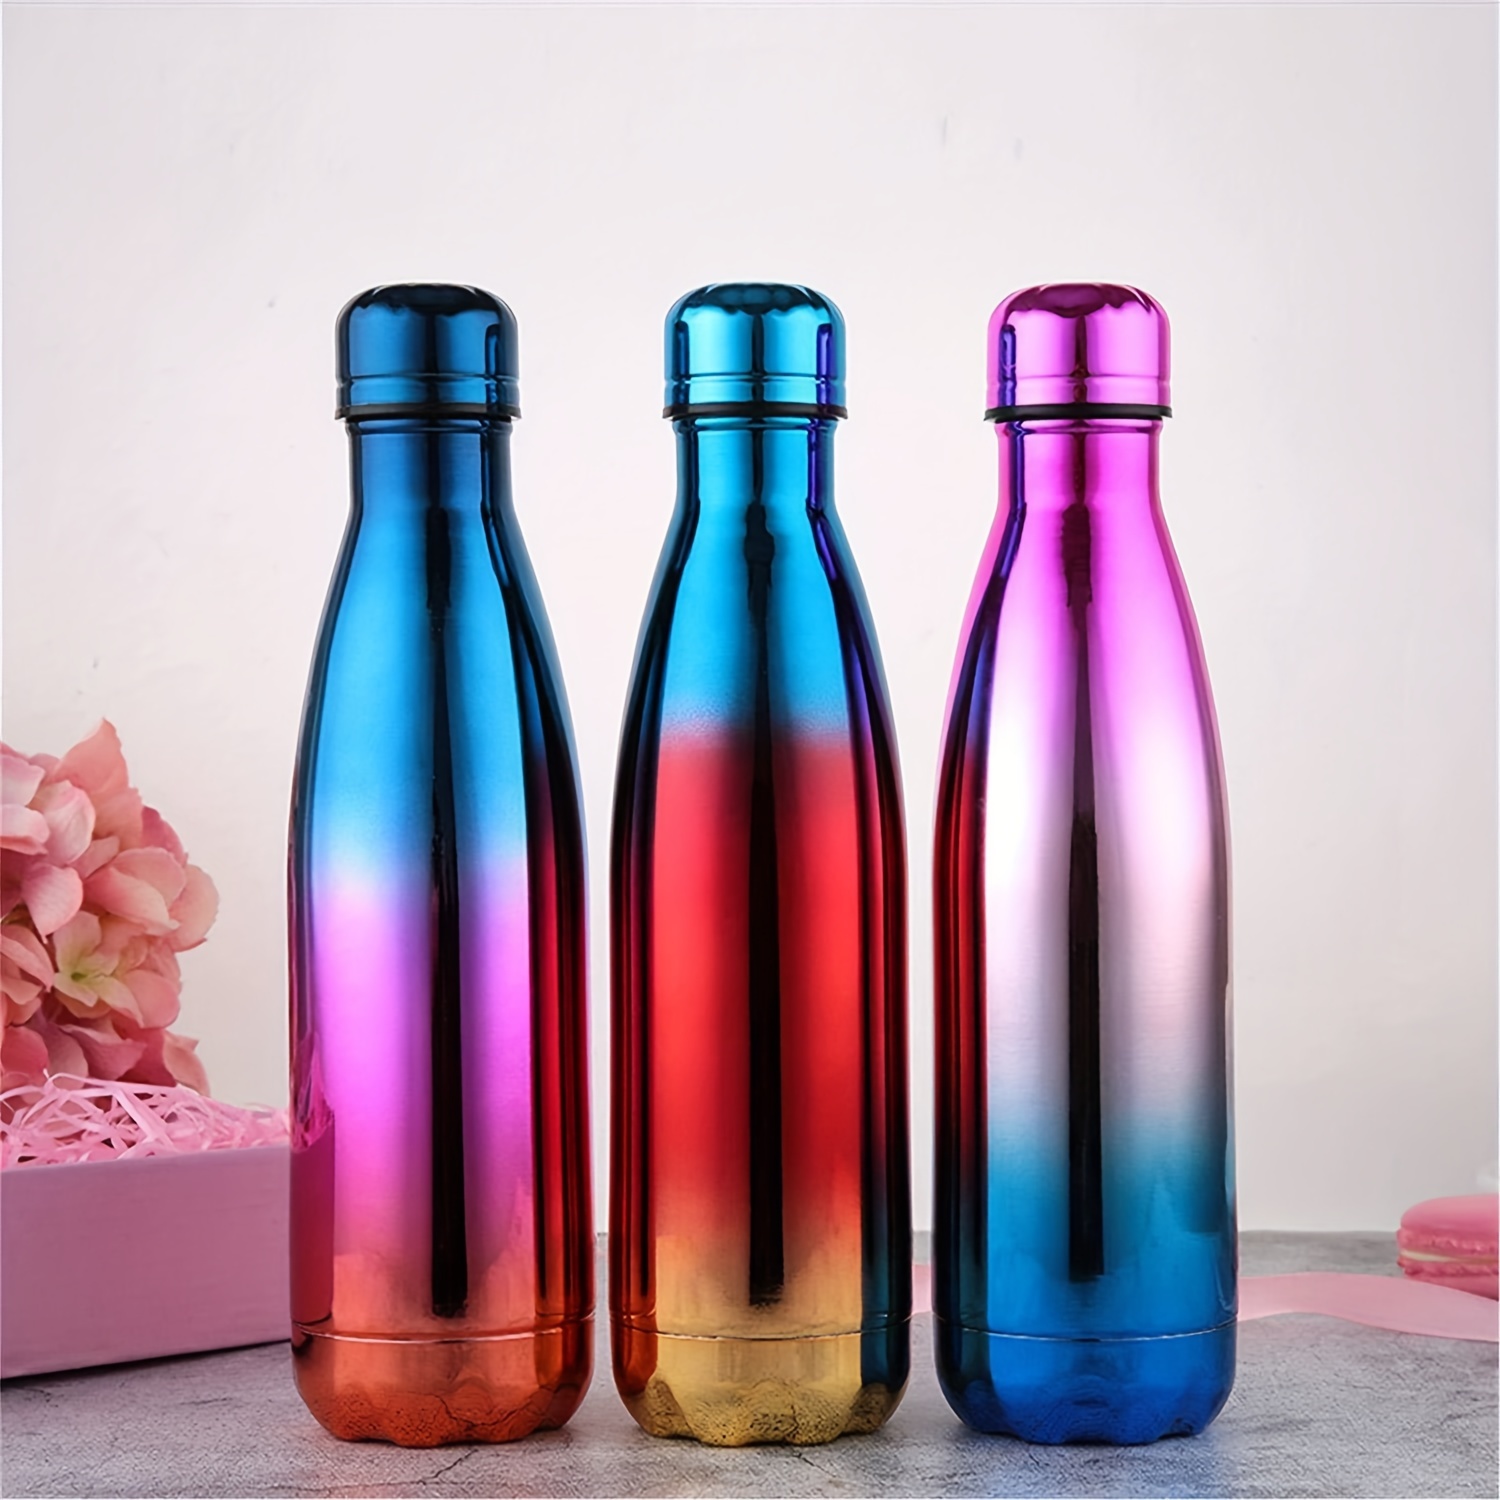 Craft Express 4 Pack 17oz Stainless Steel Sublimation Cola Bottle